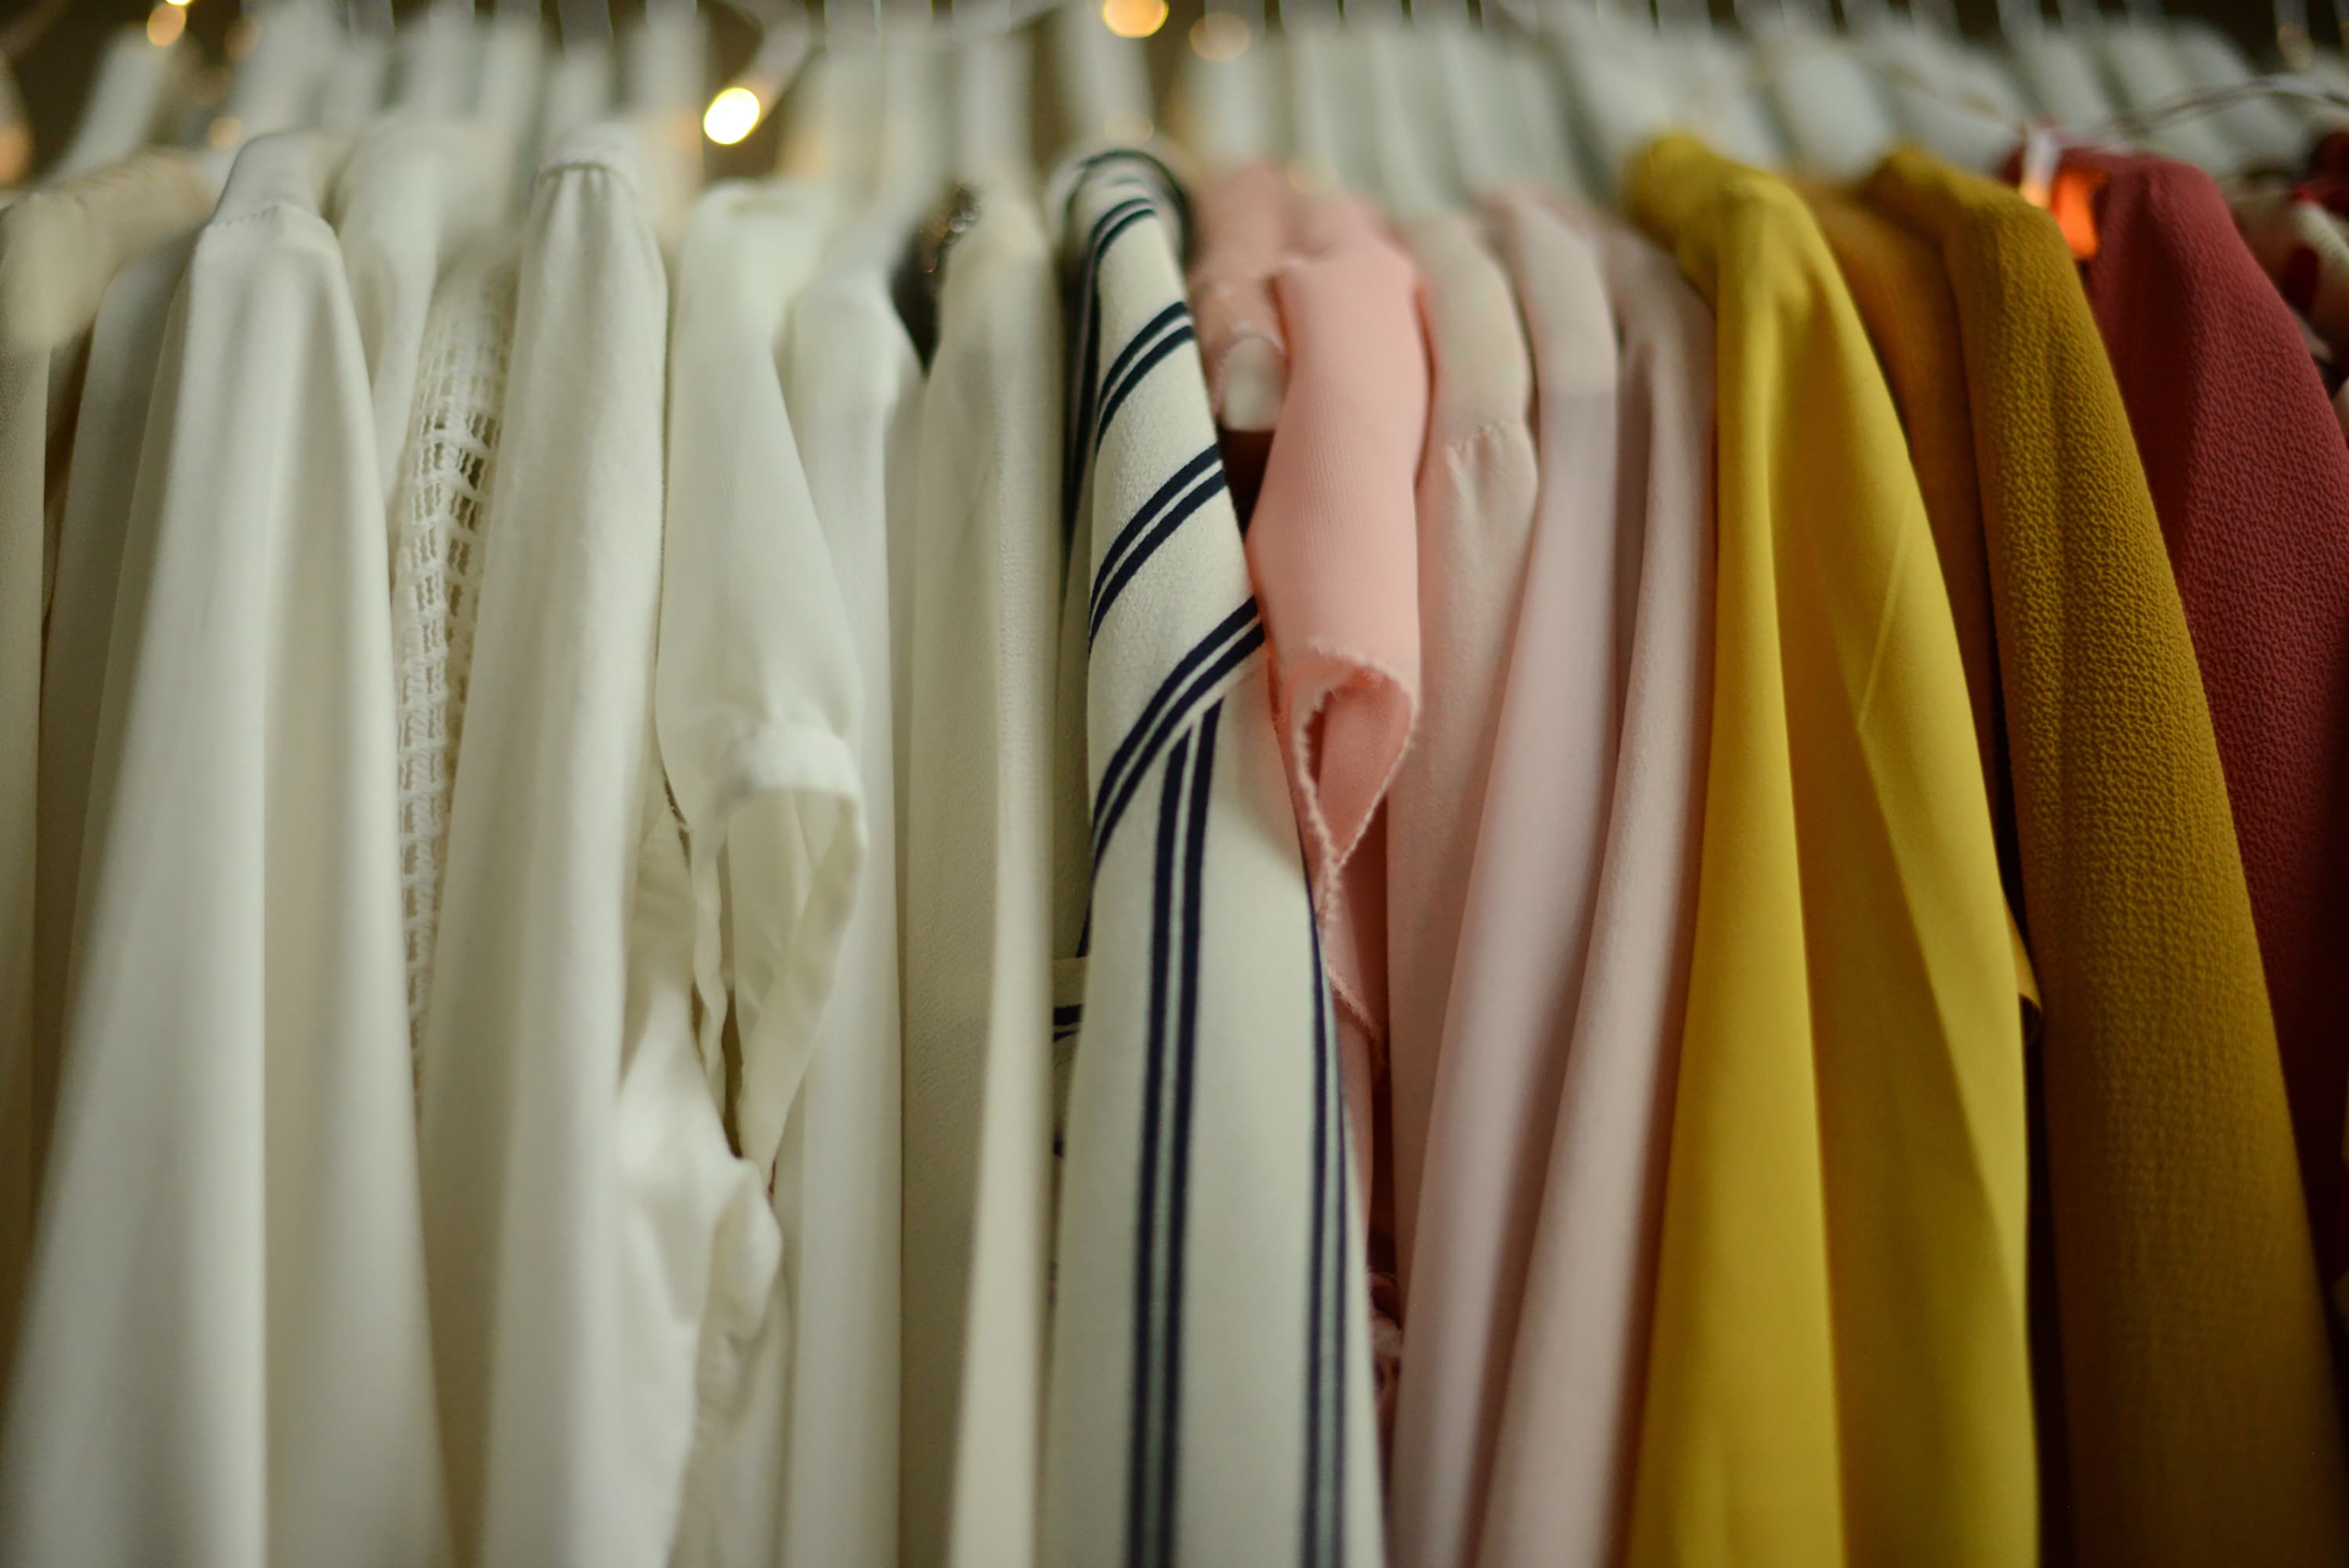 How to Organize Your Closet by Color Like a Pro - Small Stuff Counts